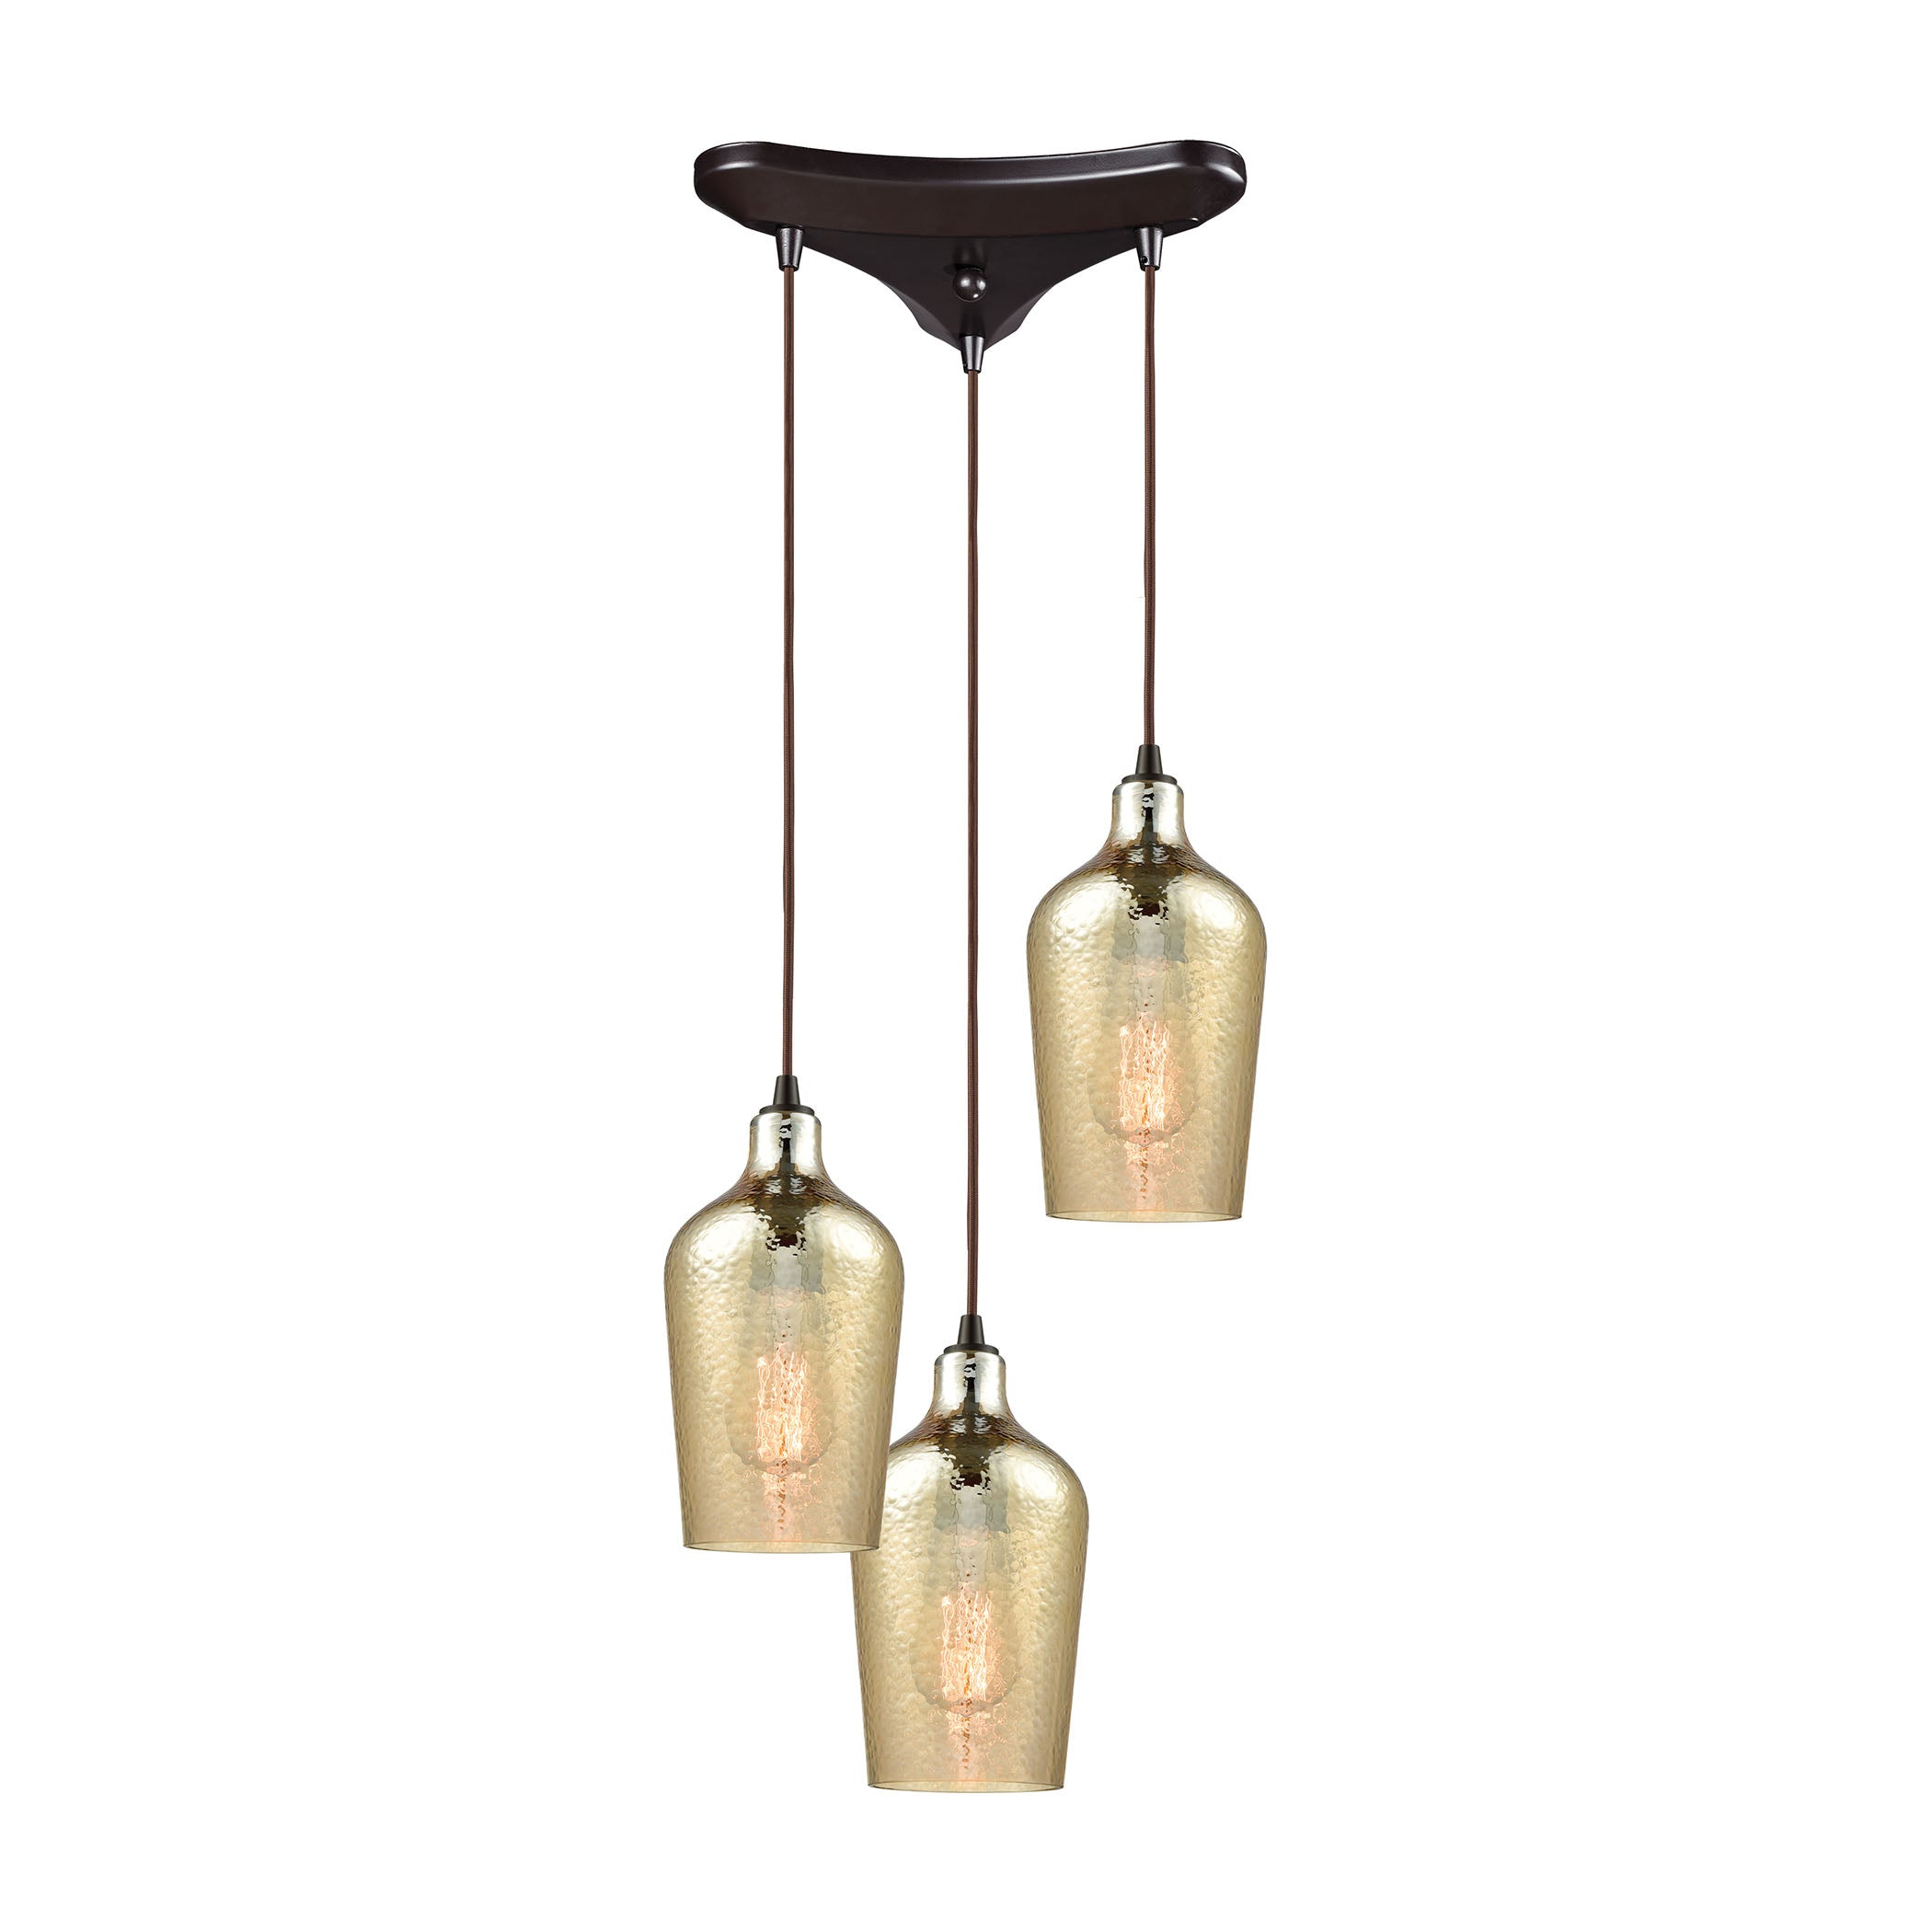 ELK Lighting 10840/3 Hammered Glass 3-Light Triangular Pendant Fixture in Oiled Bronze with Amber-plated Hammered Glass